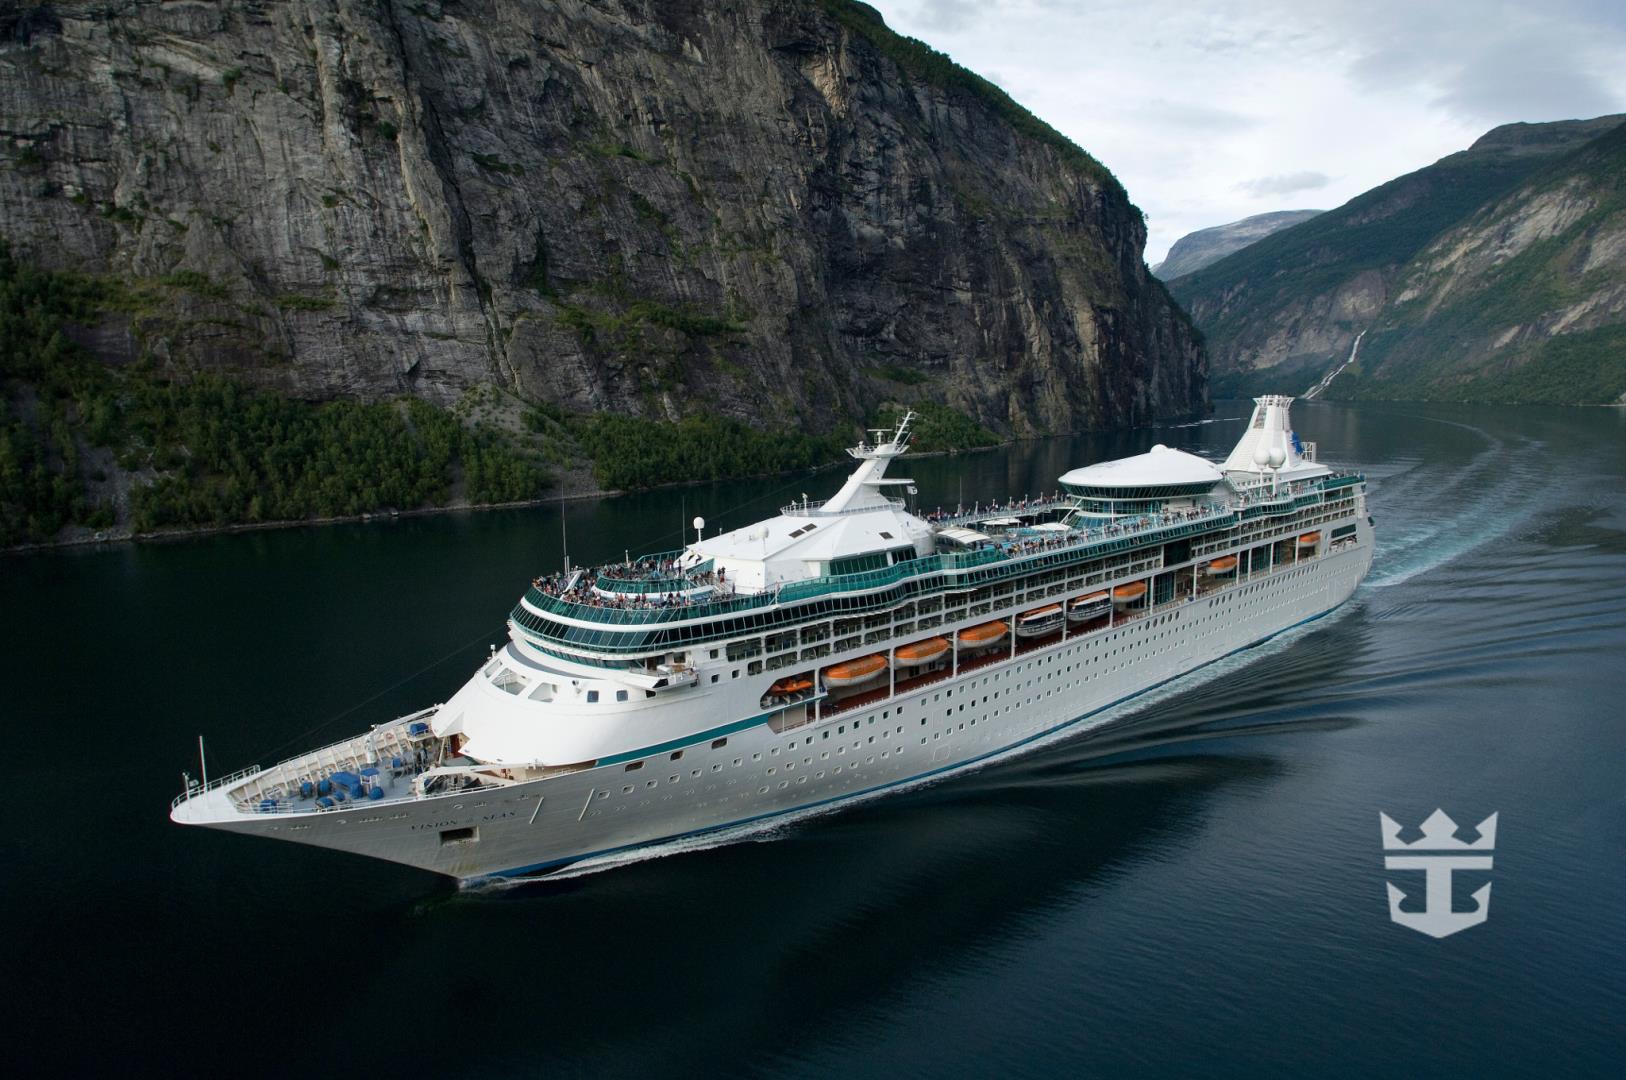 Exterior view of Vision of the Seas sailing near Norway